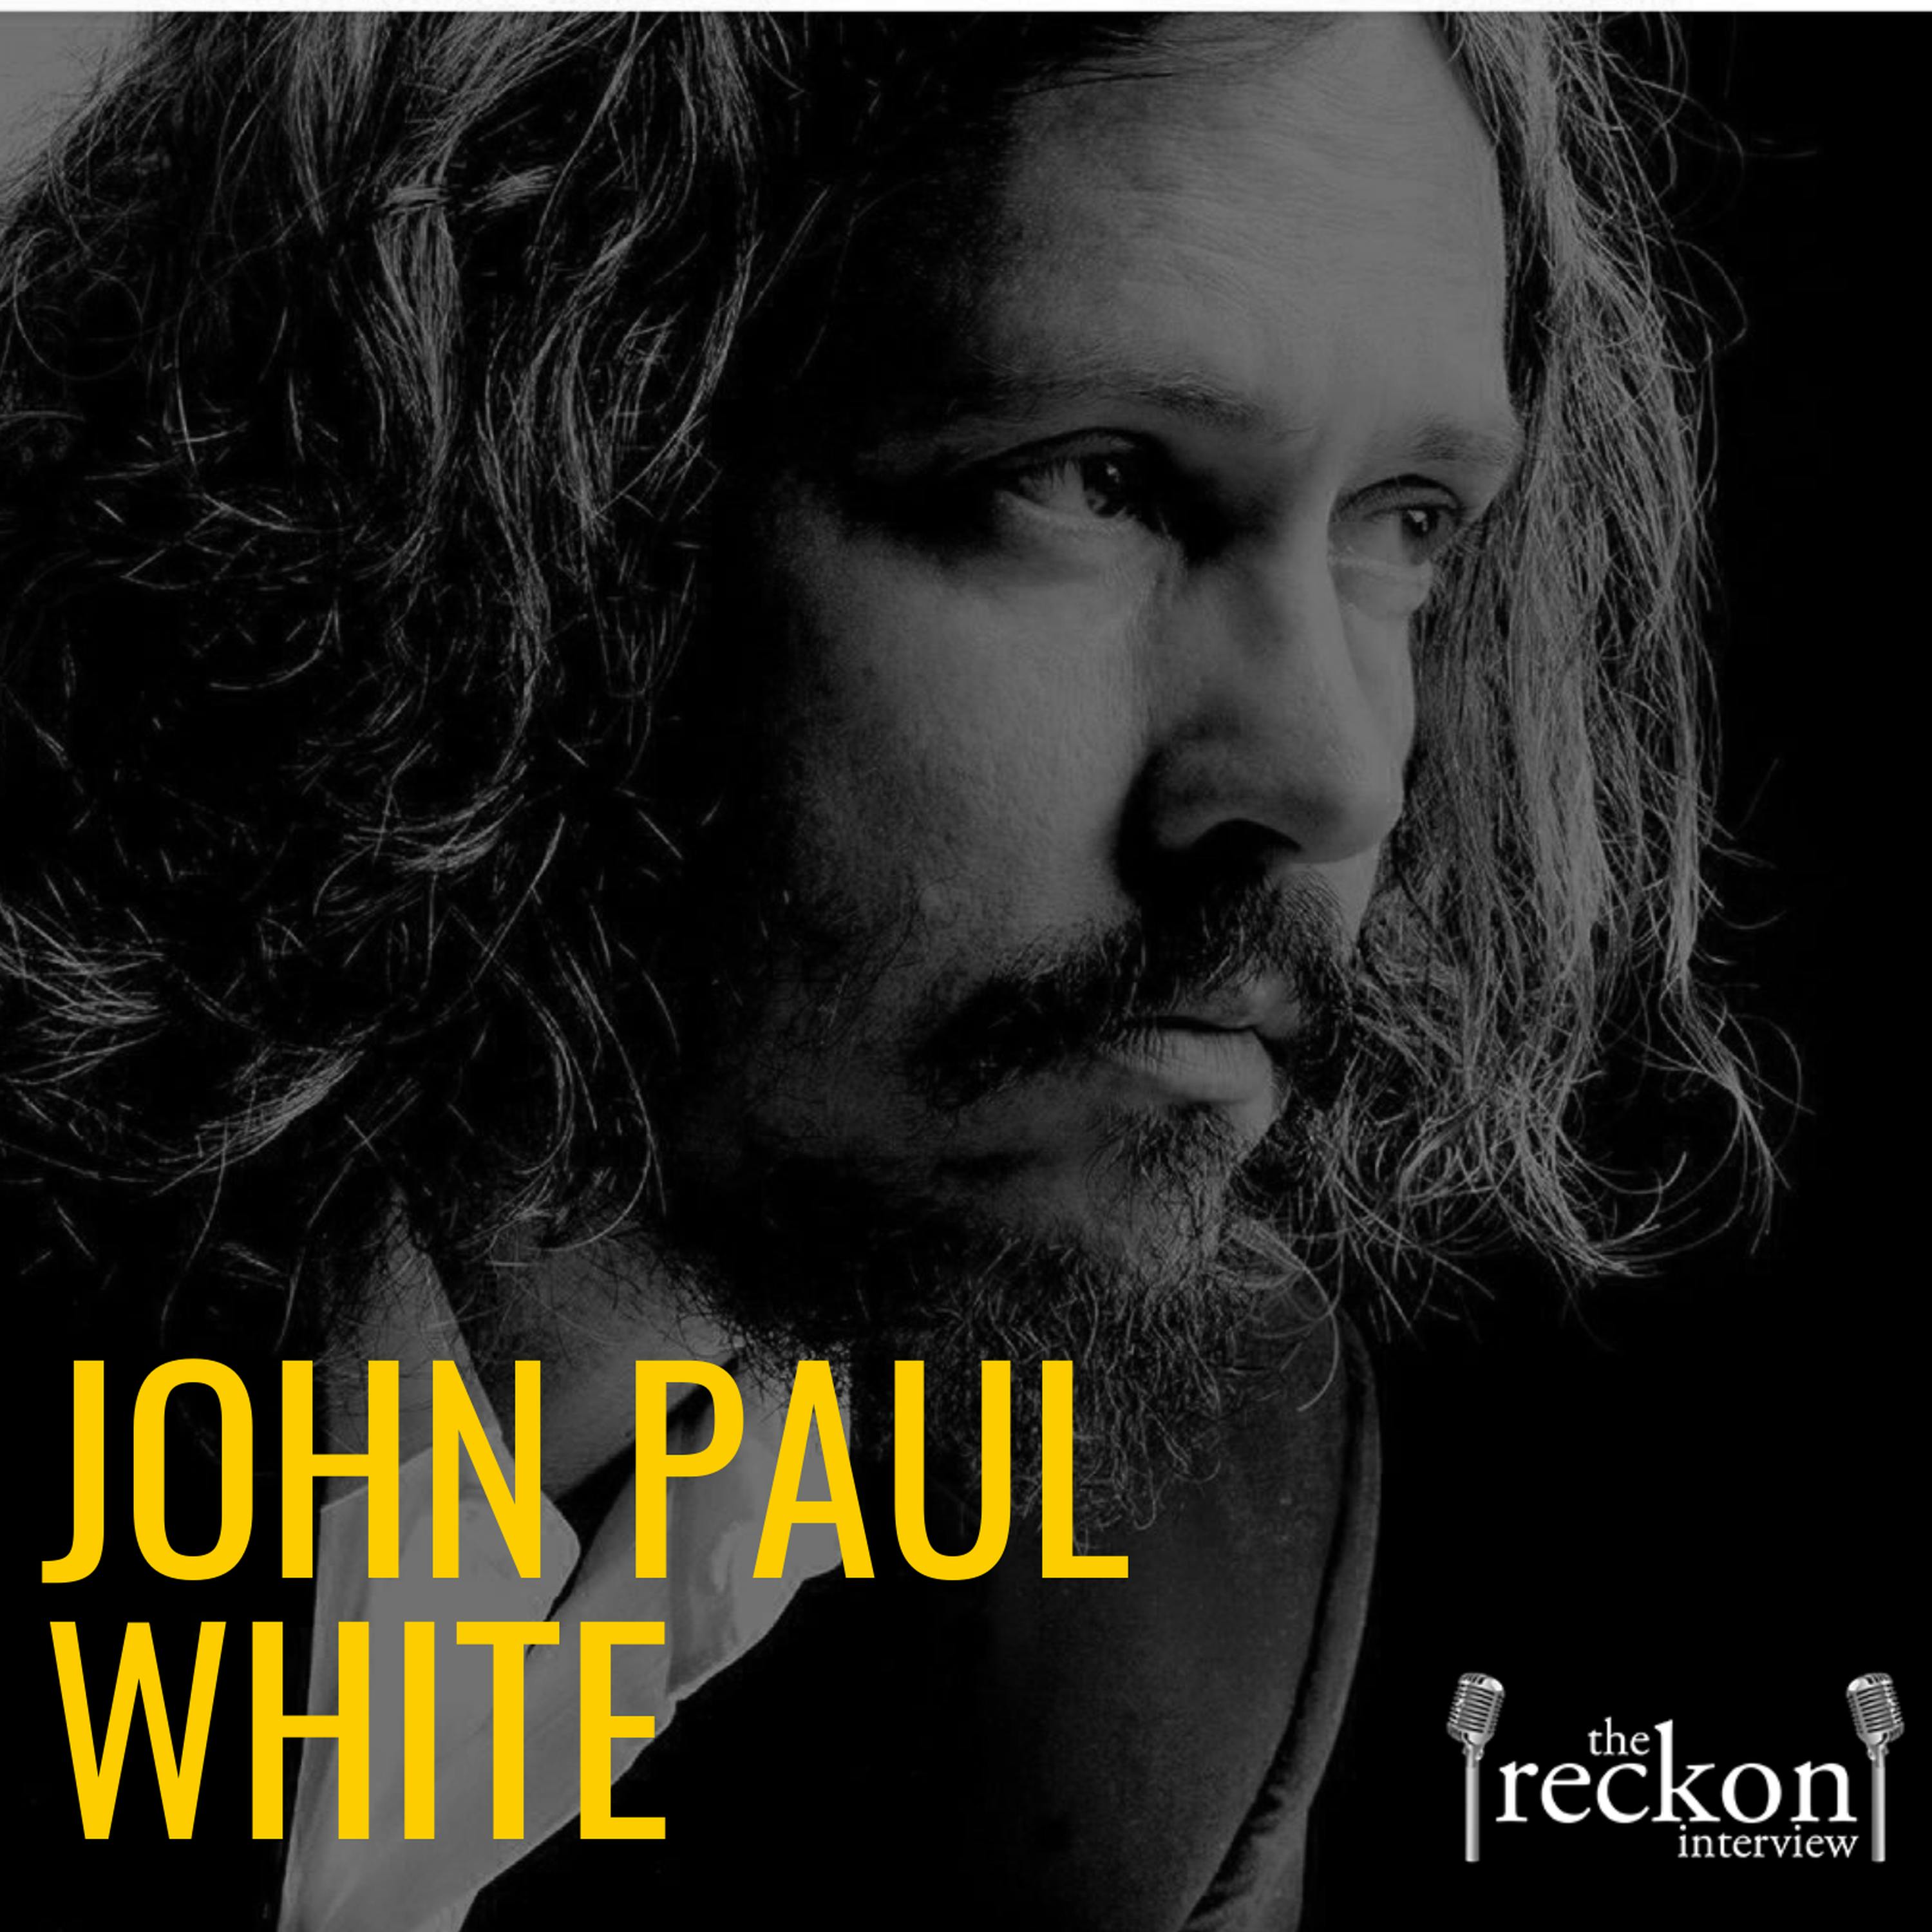 John Paul White on John Prine, Muscle Shoals and how COVID-19 could change music forever